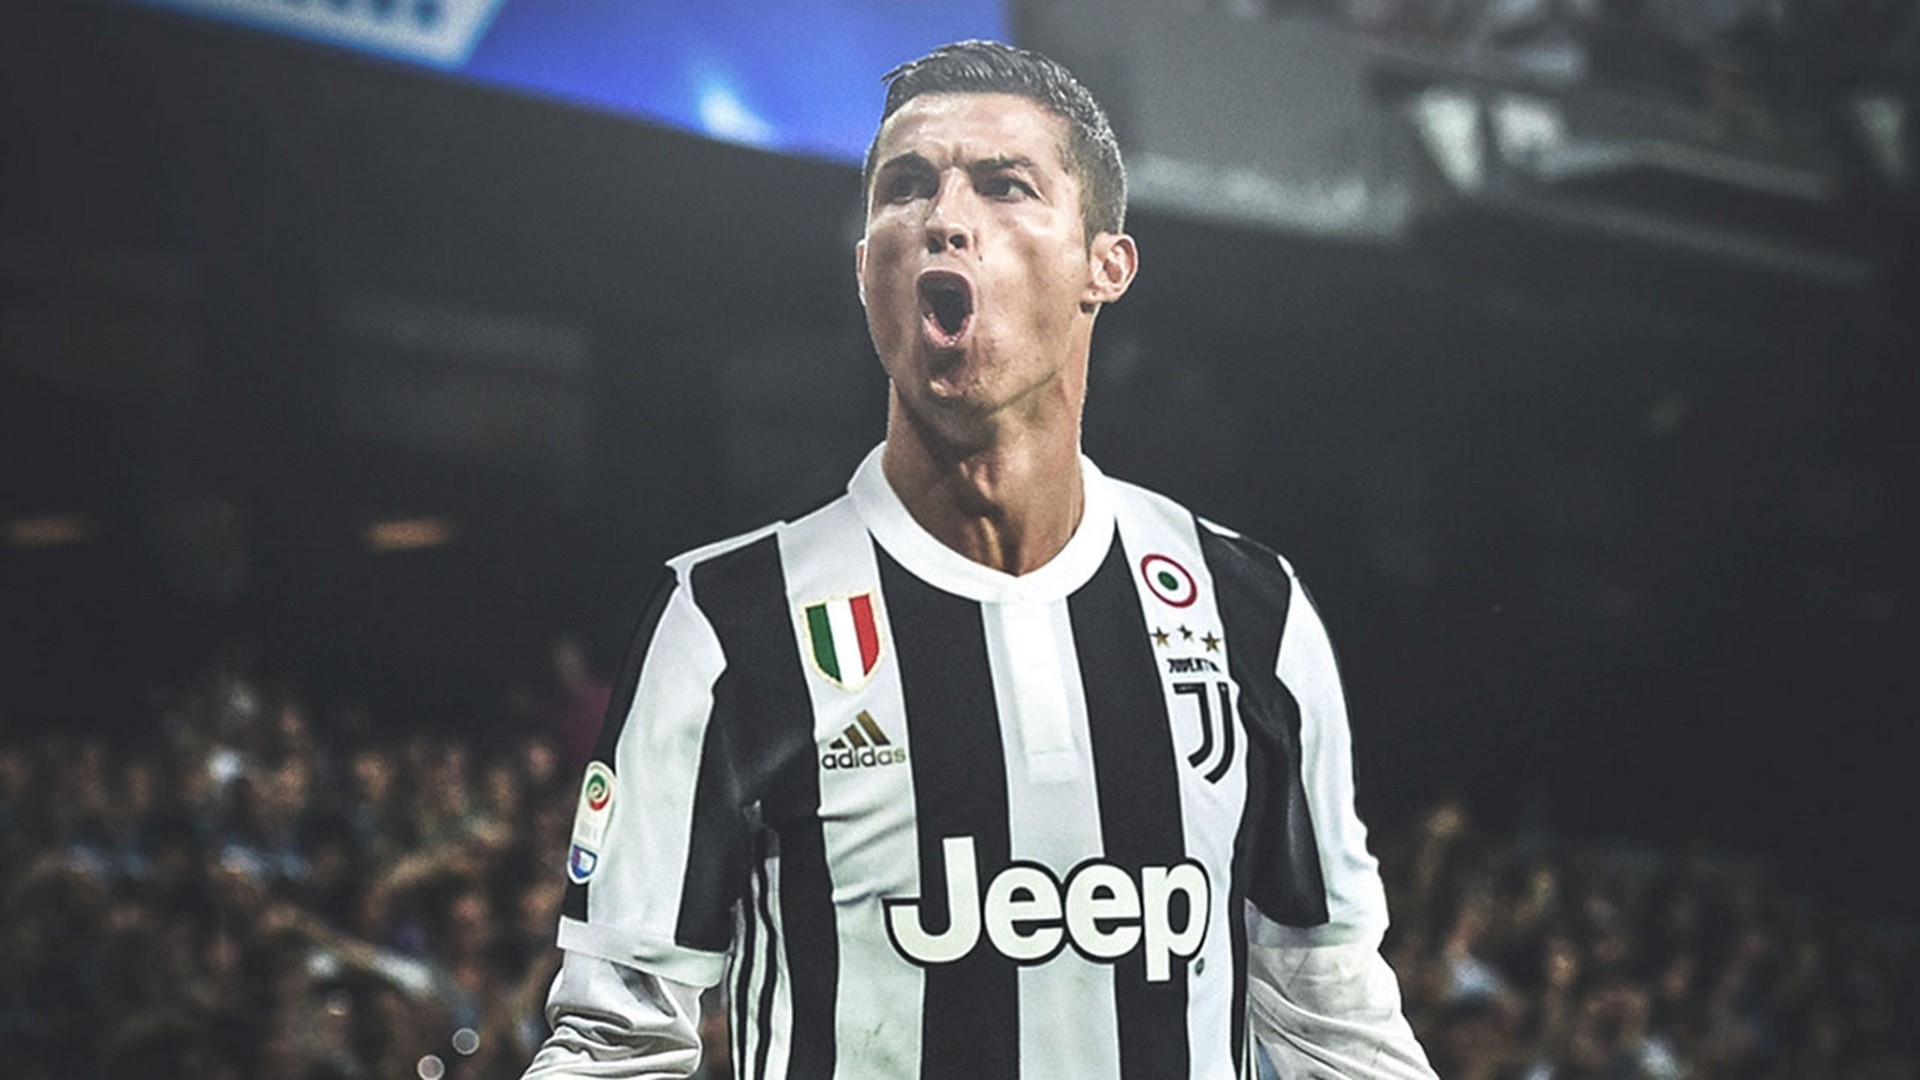 CR7 Juventus Desktop Wallpaper with image resolution 1920x1080 pixel. You can use this wallpaper as background for your desktop Computer Screensavers, Android or iPhone smartphones